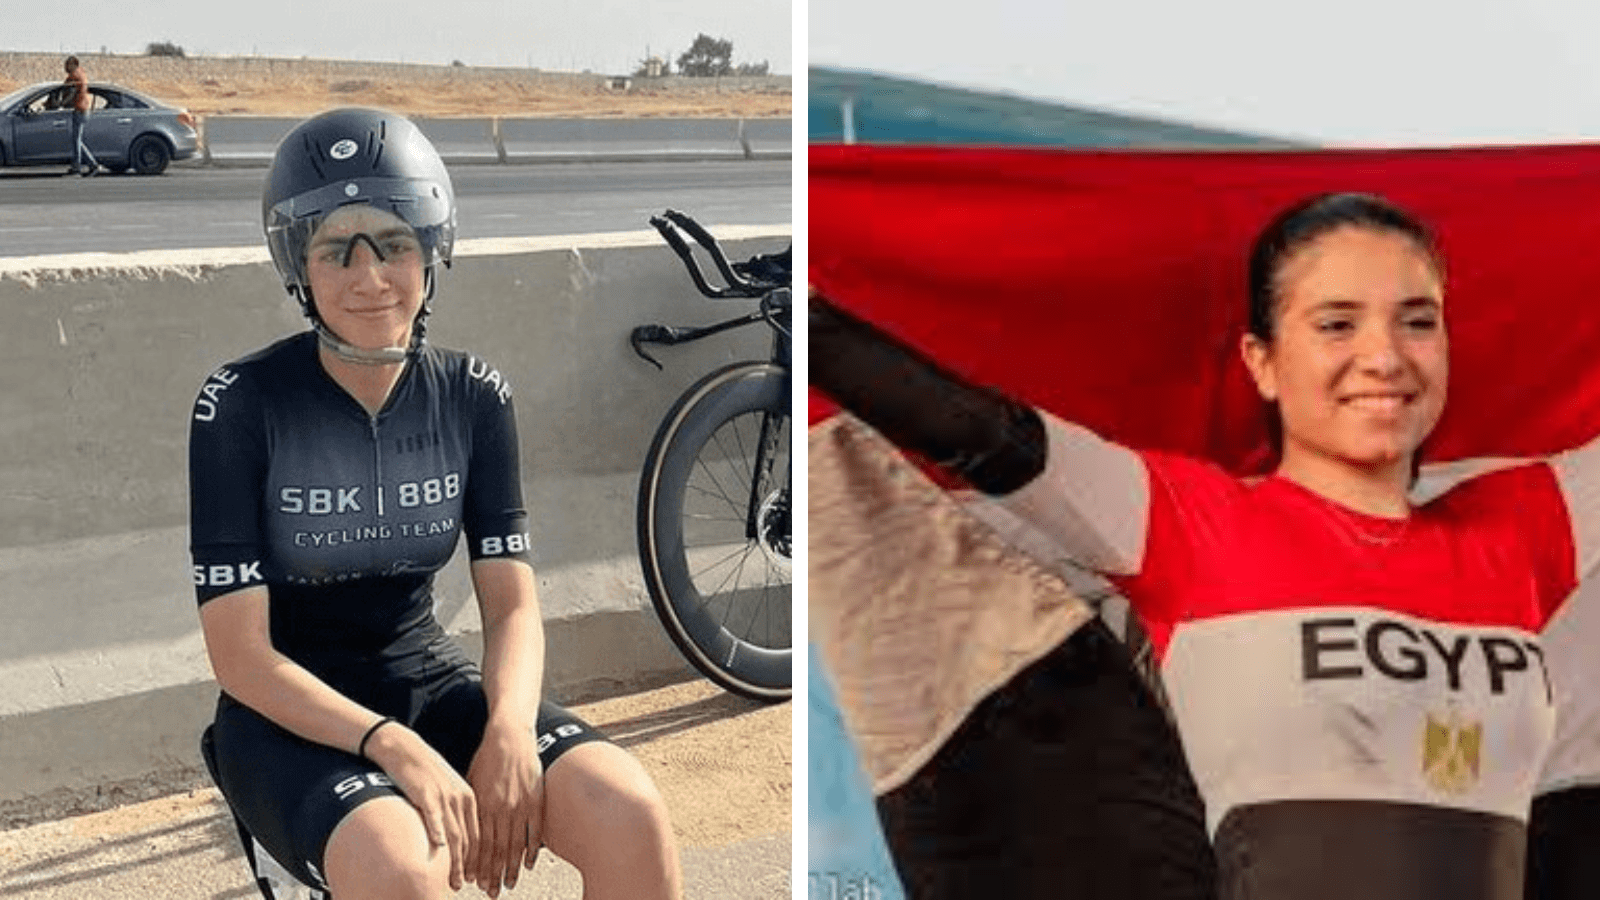 Tragic Incident at Egypt's Women's Cycling Championship Sparks Controversy and Investigation